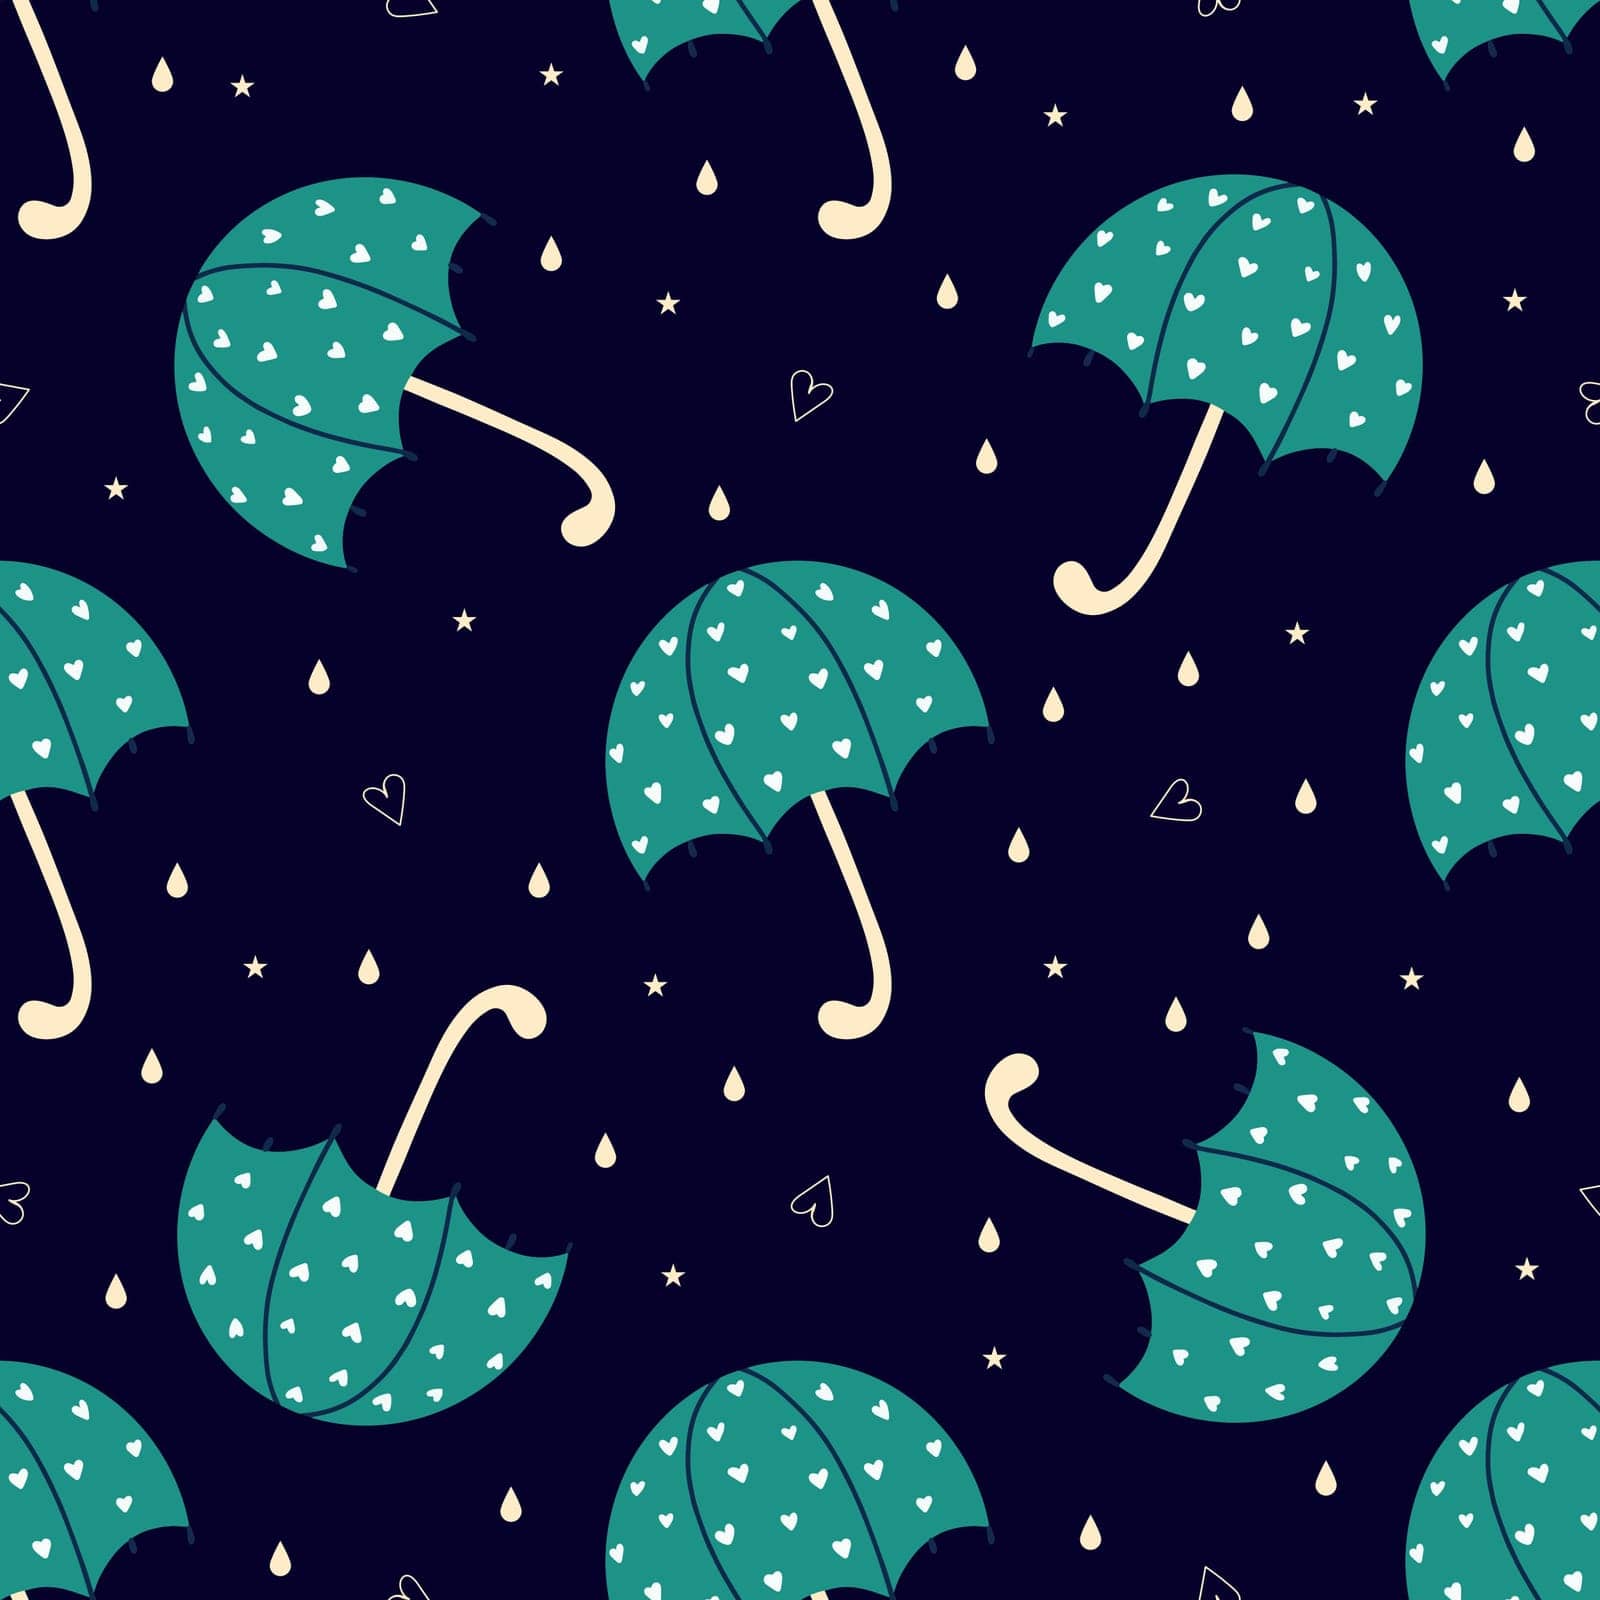 umbrella and hearts pattern vector design. vector illustration by Dustick